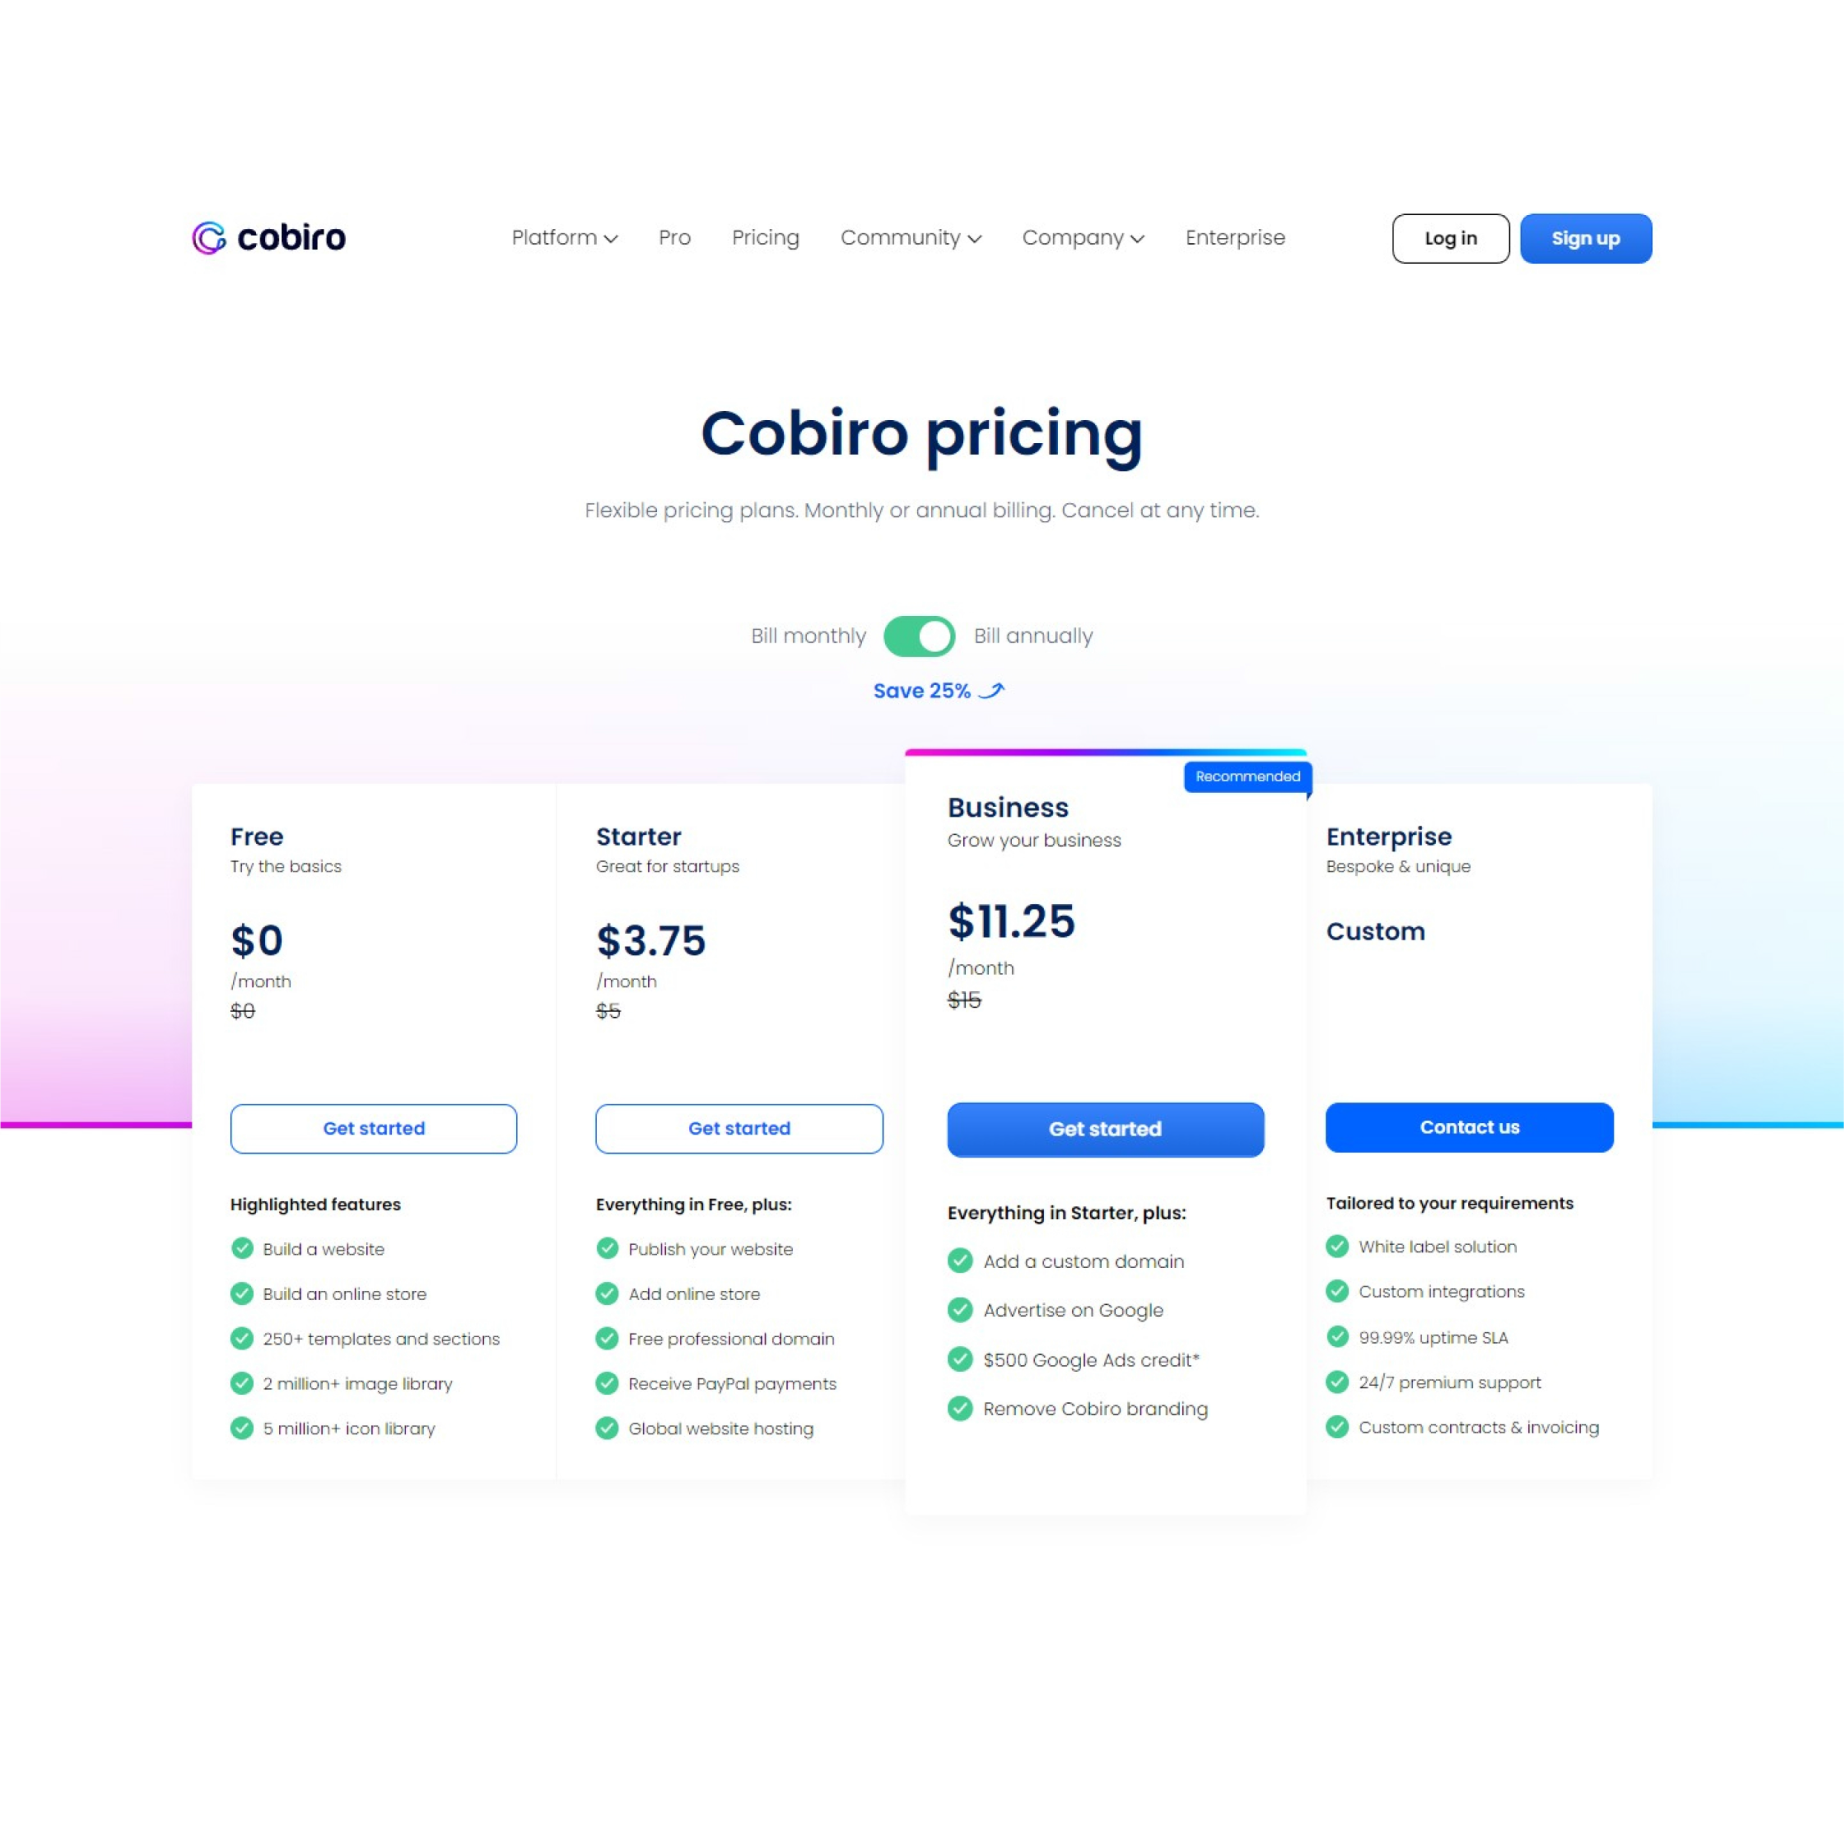 Screenshot showcasing Cobiro's pricing plans on their website, including Free, Starter, Business, and Enterprise options with clear pricing and feature lists for each tier.